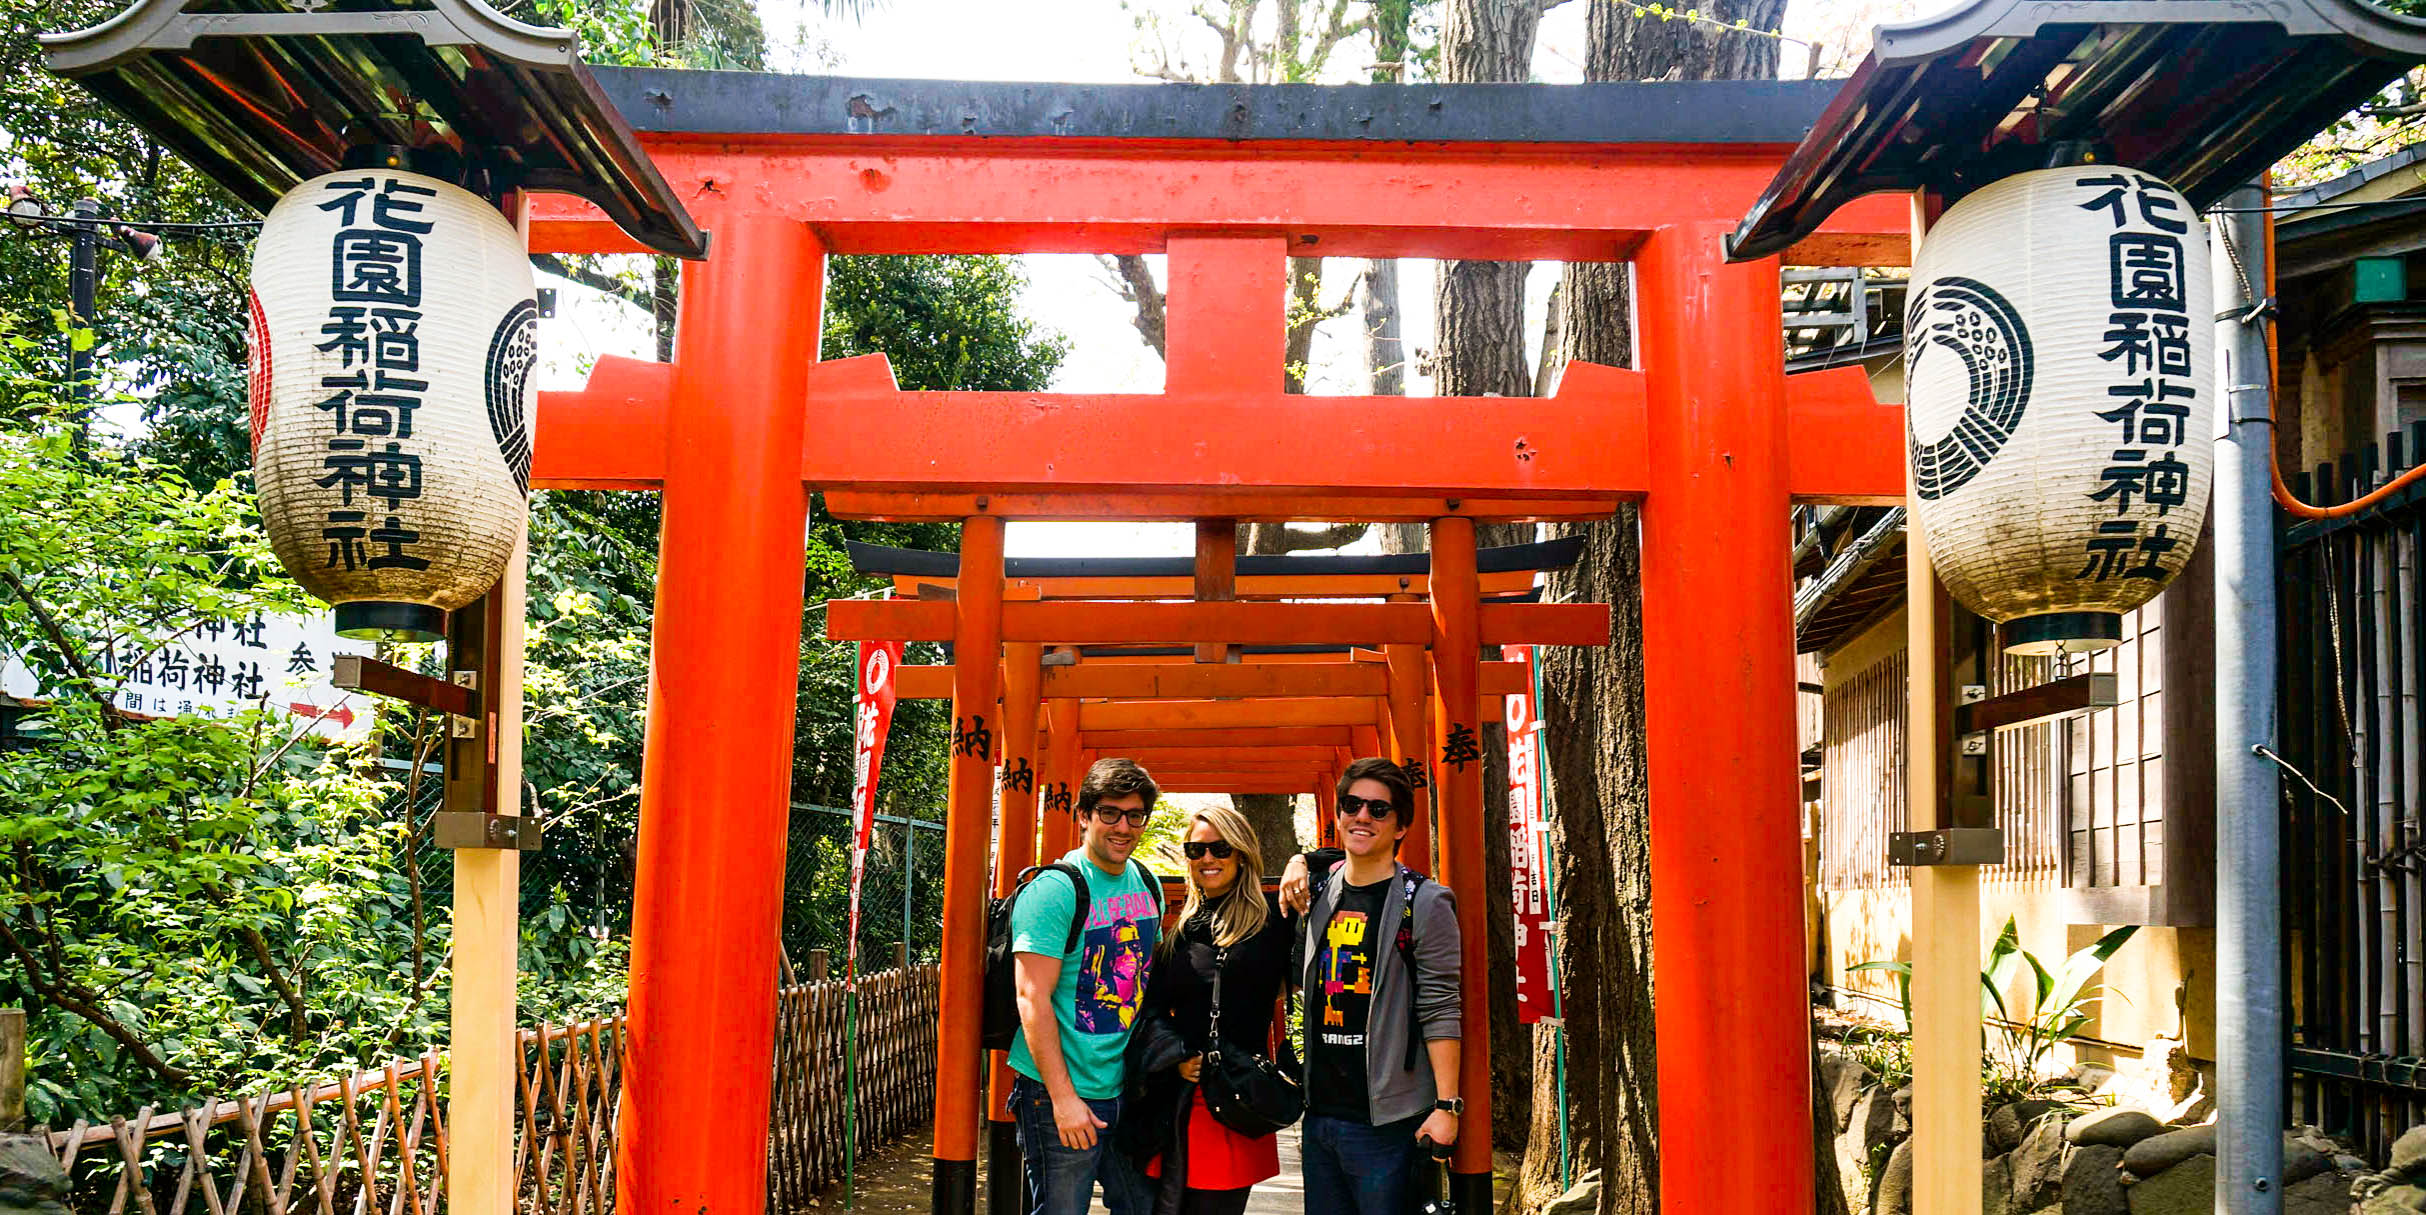 Enjoying our first day in Asia at Ueno Park